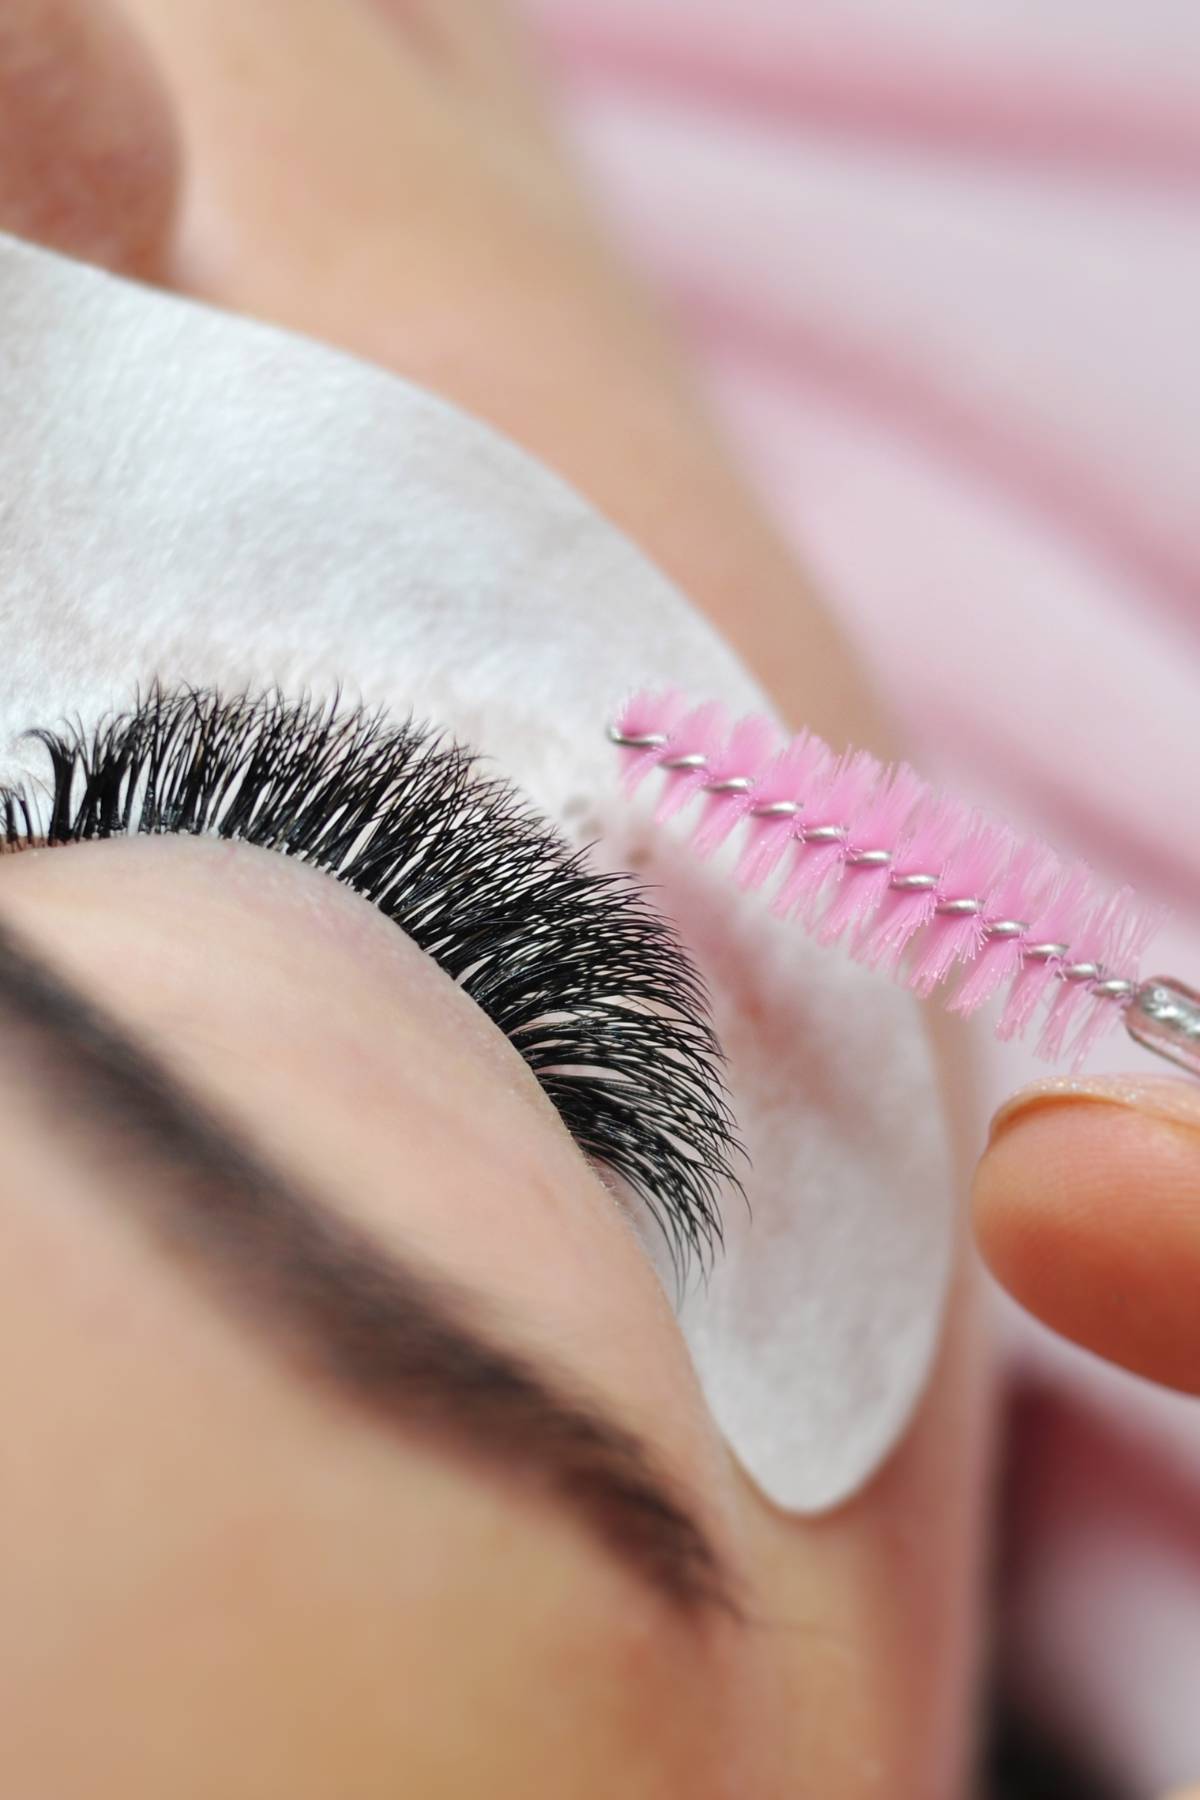 Lash Extensions For Your Wedding: Should You Do It?